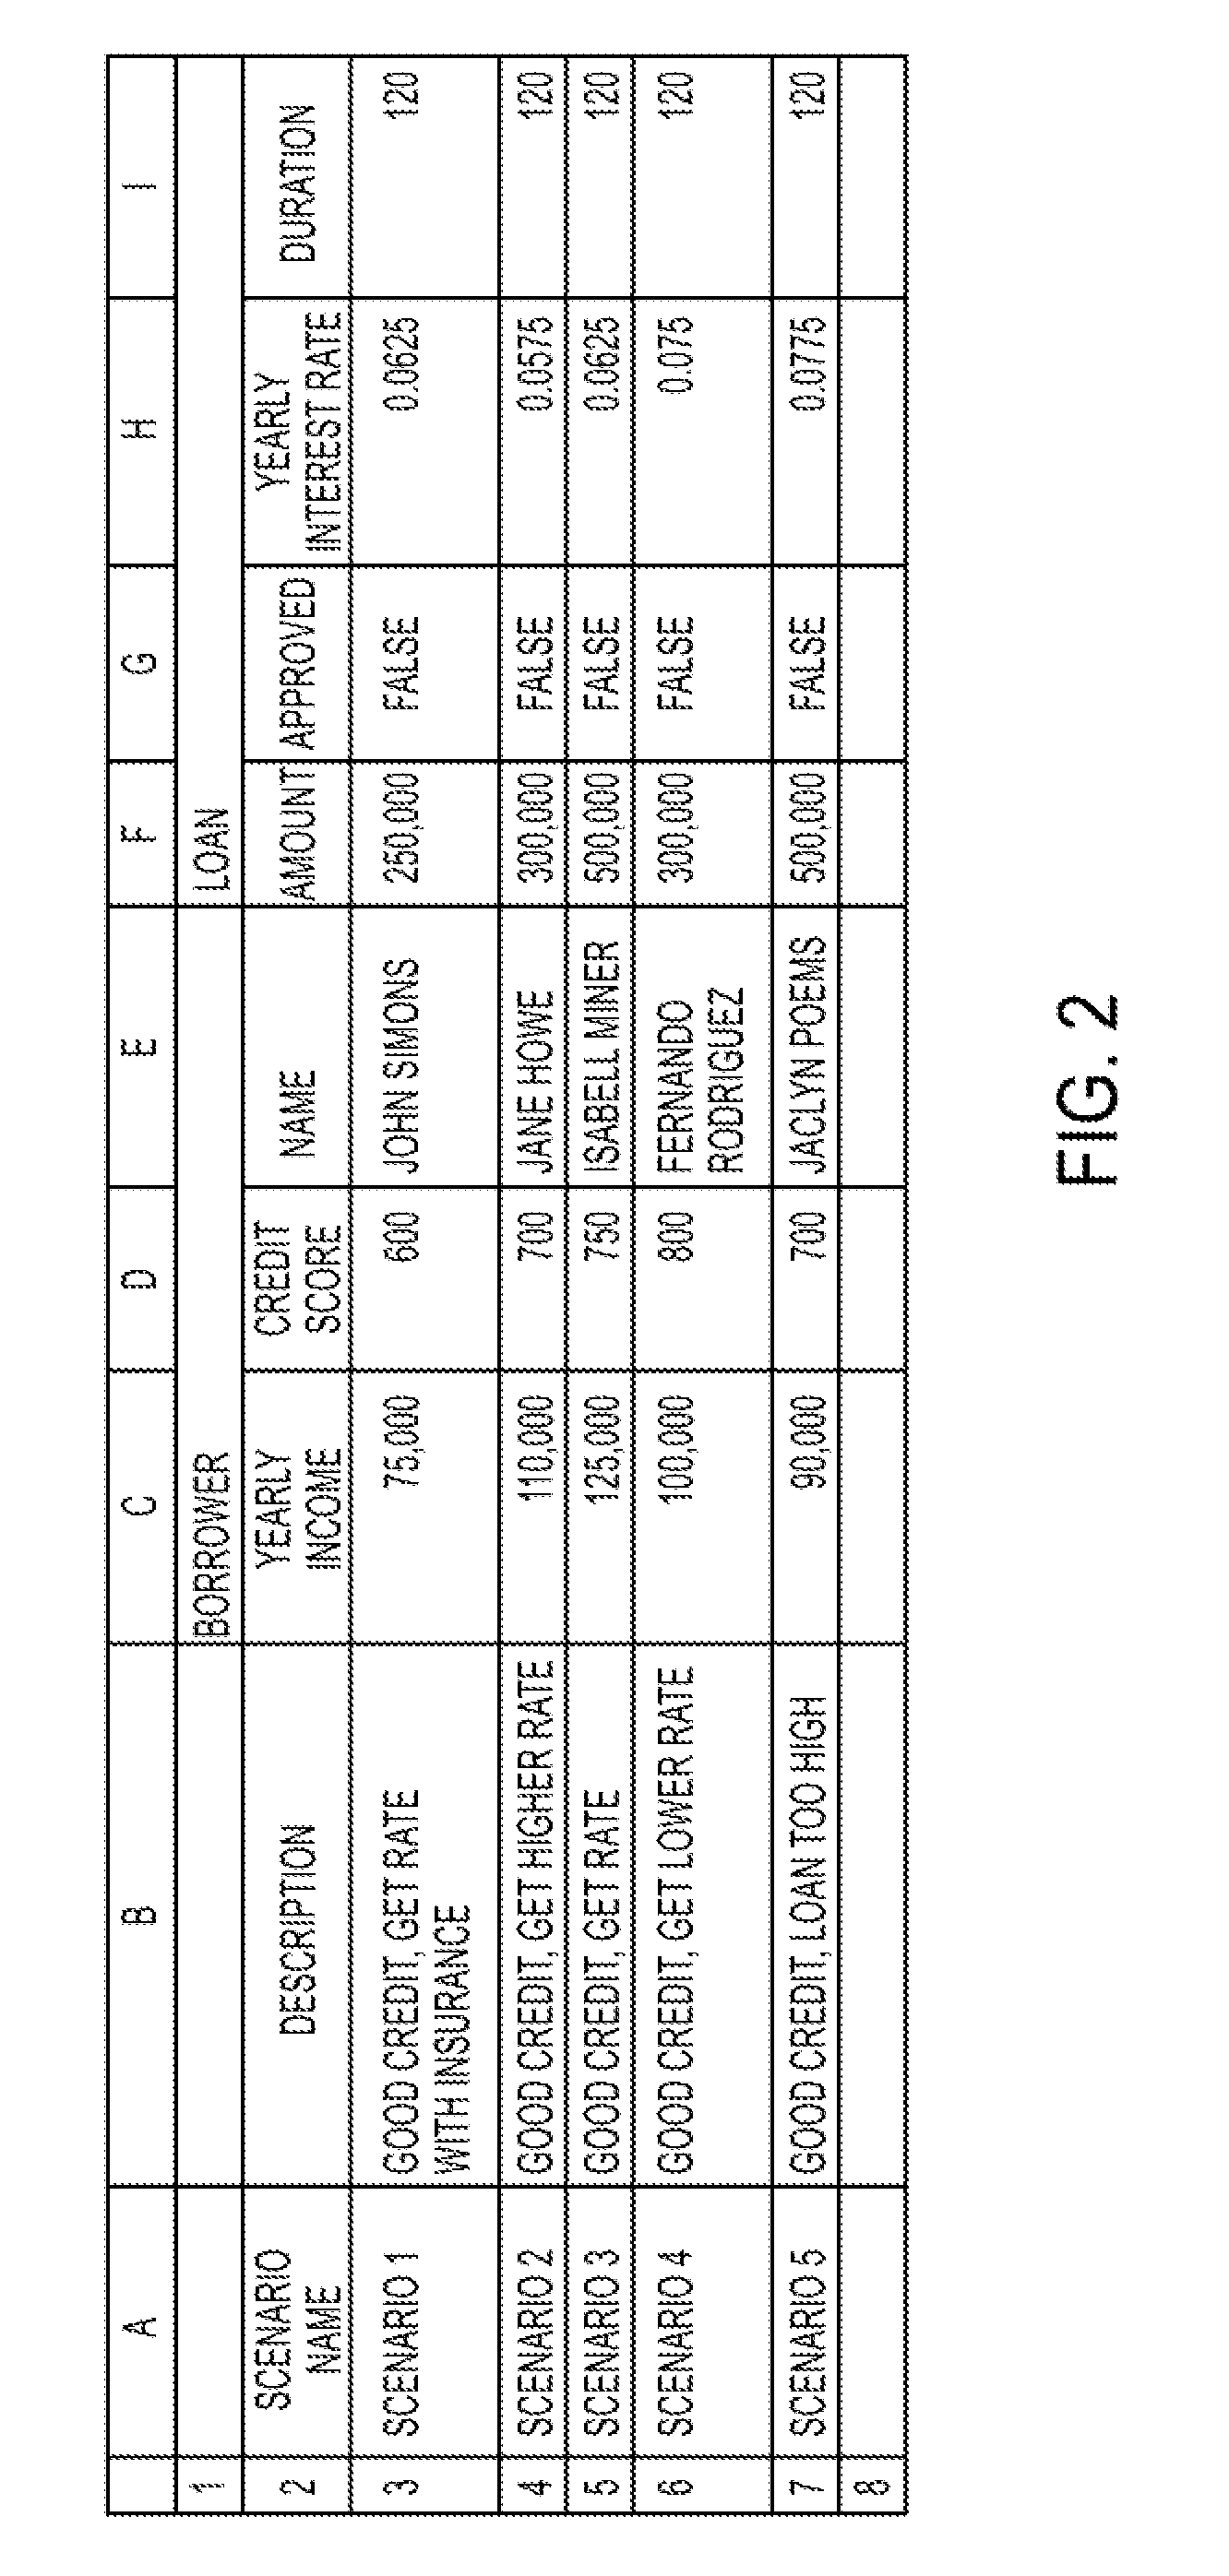 Method and apparatus for generating test scenarios for a set of business rules